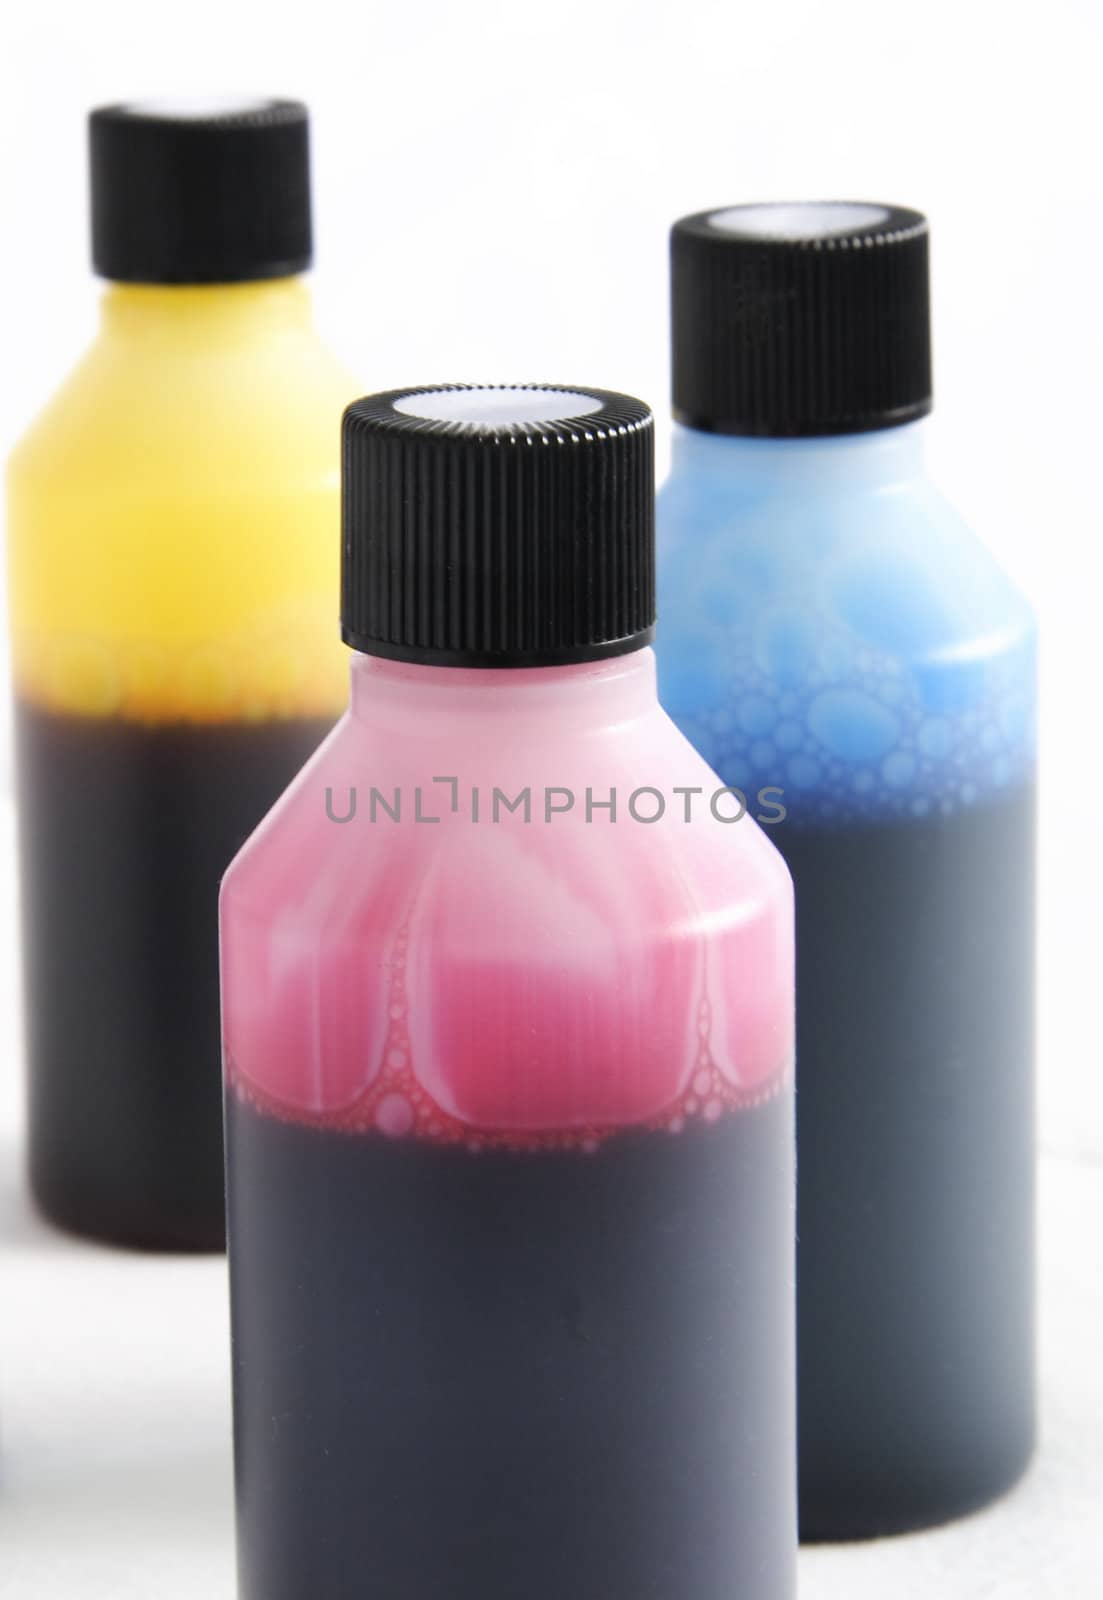 three plastic bottles with different coloured ink in each